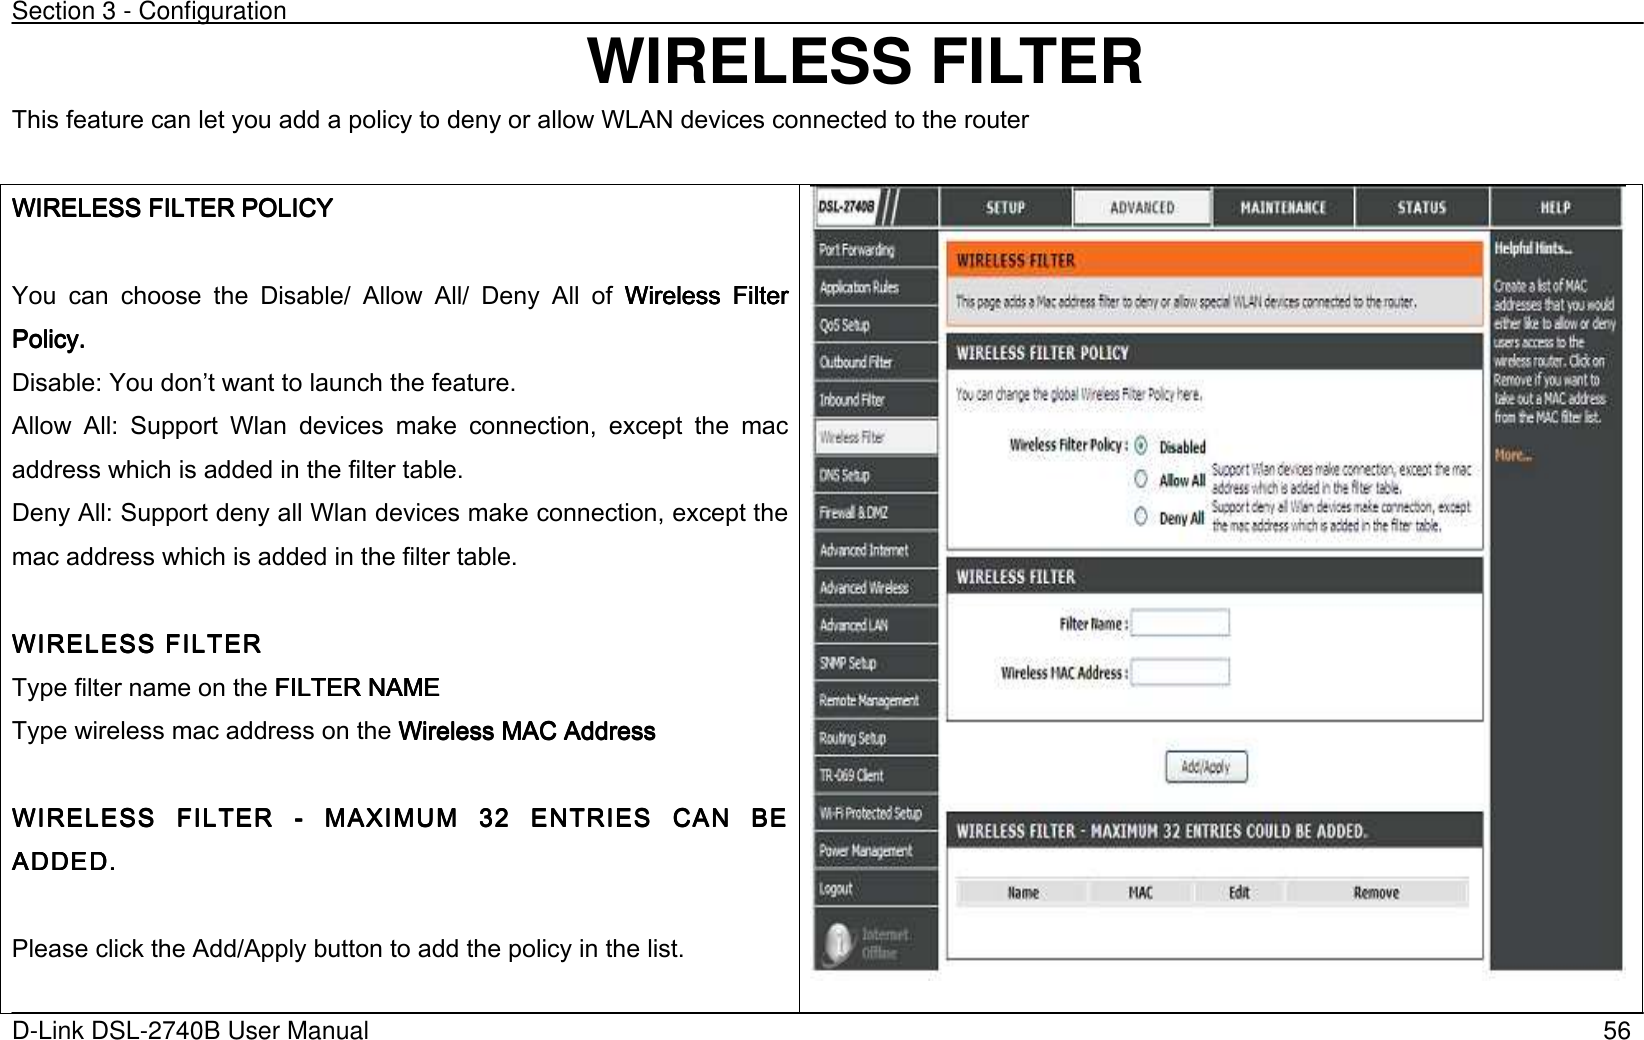 Section 3 - Configuration   D-Link DSL-2740B User Manual                                                  56 WIRELESS FILTER This feature can let you add a policy to deny or allow WLAN devices connected to the router  WIRELESS FILTER POLICYWIRELESS FILTER POLICYWIRELESS FILTER POLICYWIRELESS FILTER POLICY     You  can  choose  the  Disable/  Allow  All/  Deny  All  of  Wireless  Filter Wireless  Filter Wireless  Filter Wireless  Filter Policy. Policy. Policy. Policy.      Disable: You dont want to launch the feature. Allow  All:  Support  Wlan  devices  make  connection,  except  the  mac address which is added in the filter table.   Deny All: Support deny all Wlan devices make connection, except the mac address which is added in the filter table.  WIRELESS FILTERWIRELESS FILTERWIRELESS FILTERWIRELESS FILTER    Type filter name on the FILTER NAMEFILTER NAMEFILTER NAMEFILTER NAME    Type wireless mac address on the Wireless MAC AddressWireless MAC AddressWireless MAC AddressWireless MAC Address        WIRELESS  FWIRELESS  FWIRELESS  FWIRELESS  FILTER ILTER ILTER ILTER  ----  MAXIMUM  32  ENTRIES   MAXIMUM  32  ENTRIES   MAXIMUM  32  ENTRIES   MAXIMUM  32  ENTRIES  CANCANCANCAN  BE   BE   BE   BE ADDED.ADDED.ADDED.ADDED.        Please click the Add/Apply button to add the policy in the list.   